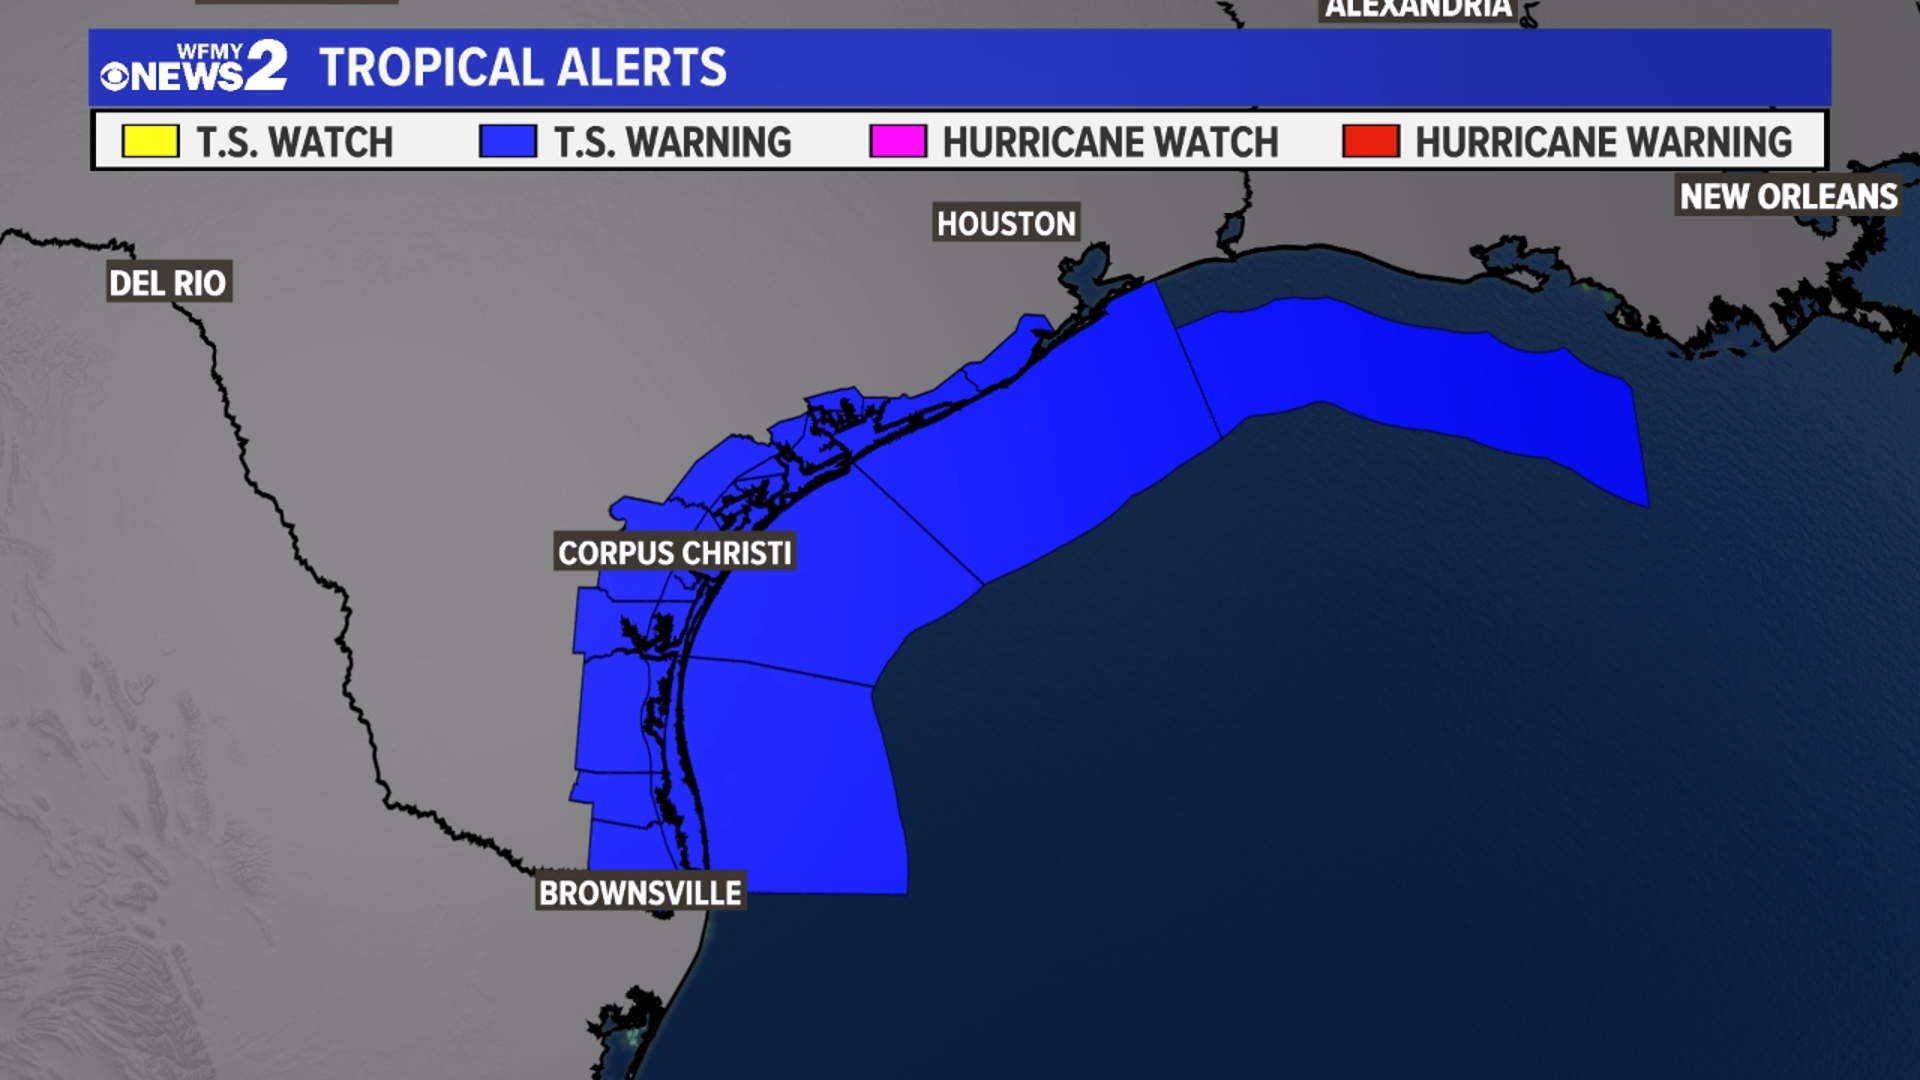 It will bring heavy rain and flooding to much of the south Texas coast.